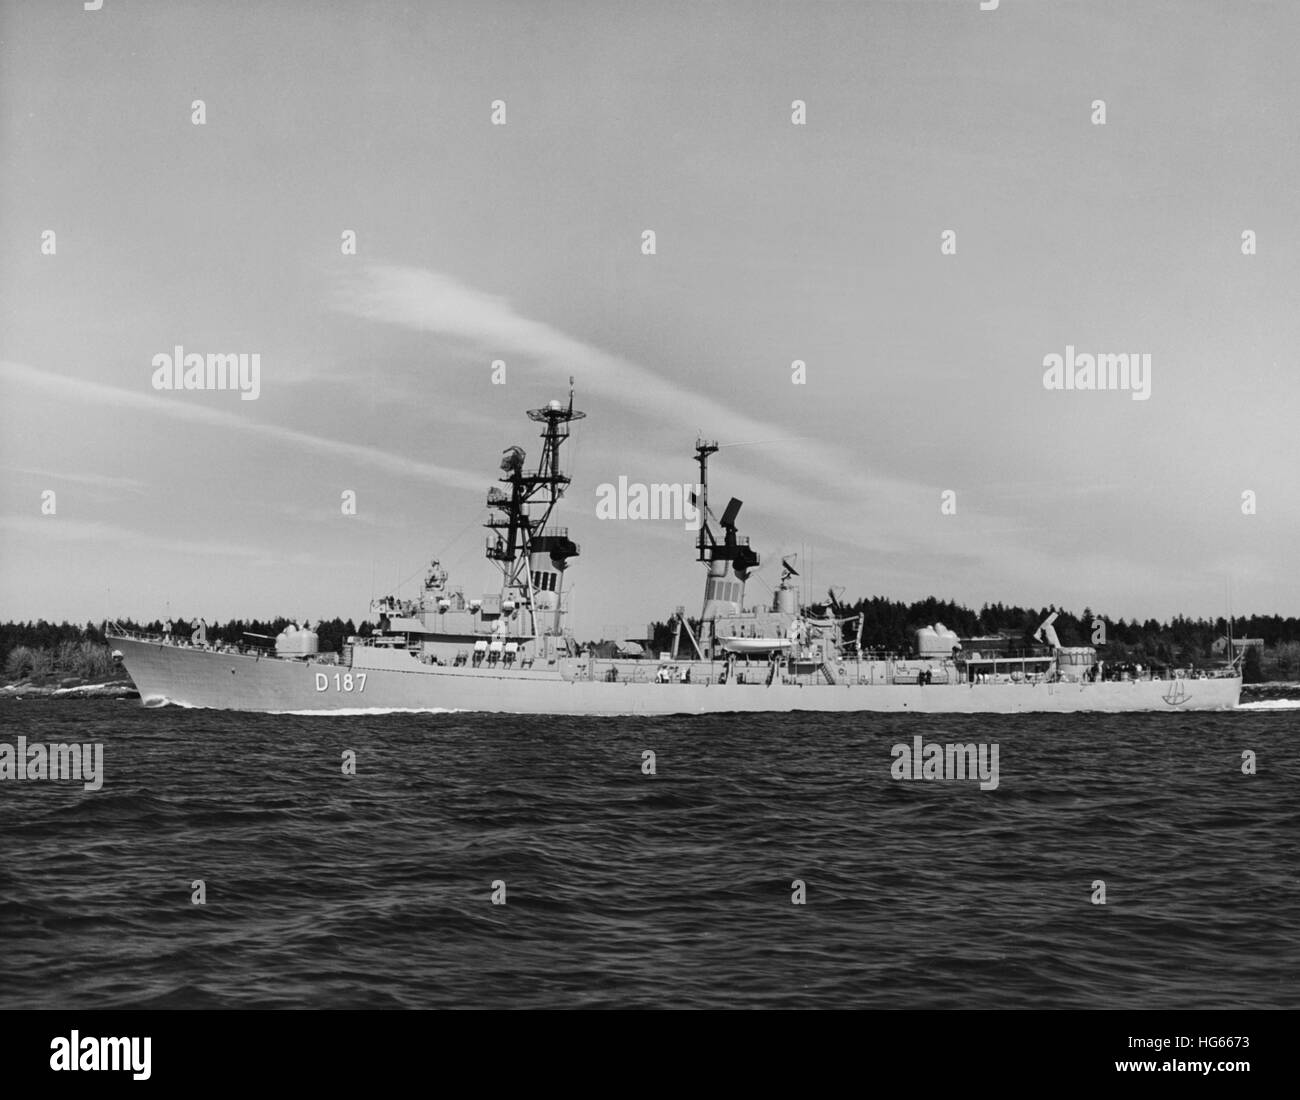 The West German Navy guided missile destroyer Rommel, 1970. Stock Photo